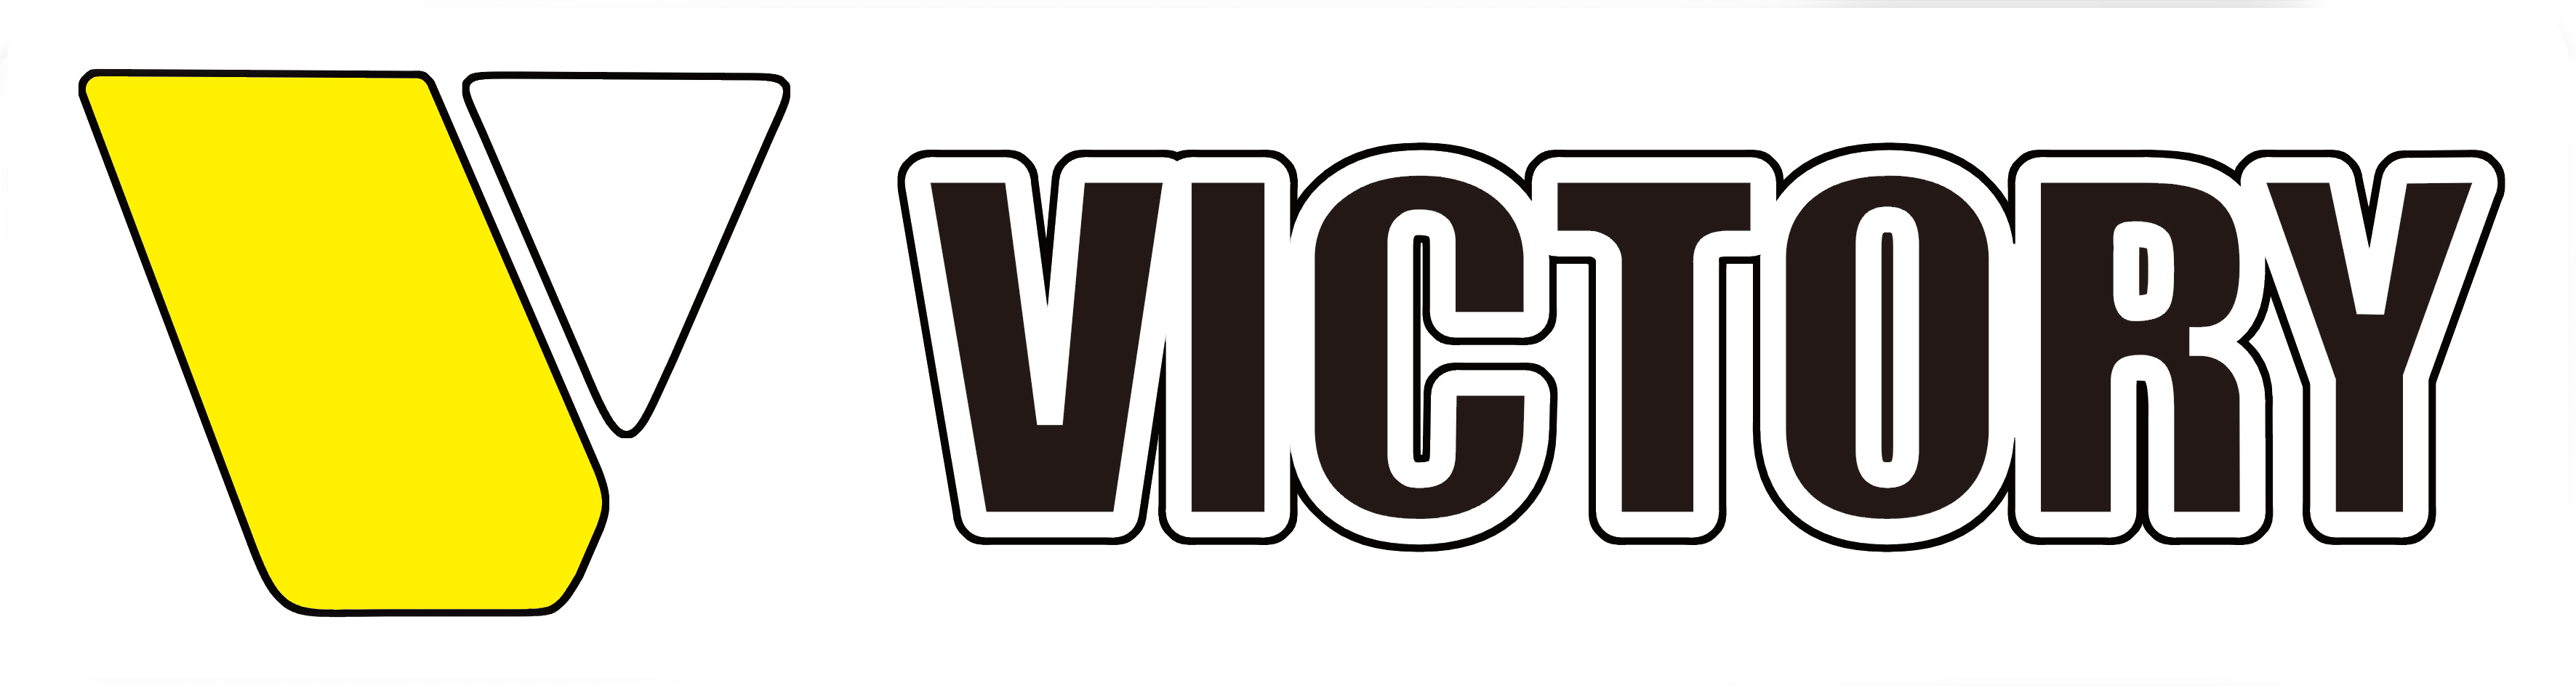 VICTORY TRACTOR EUROPE-Logo